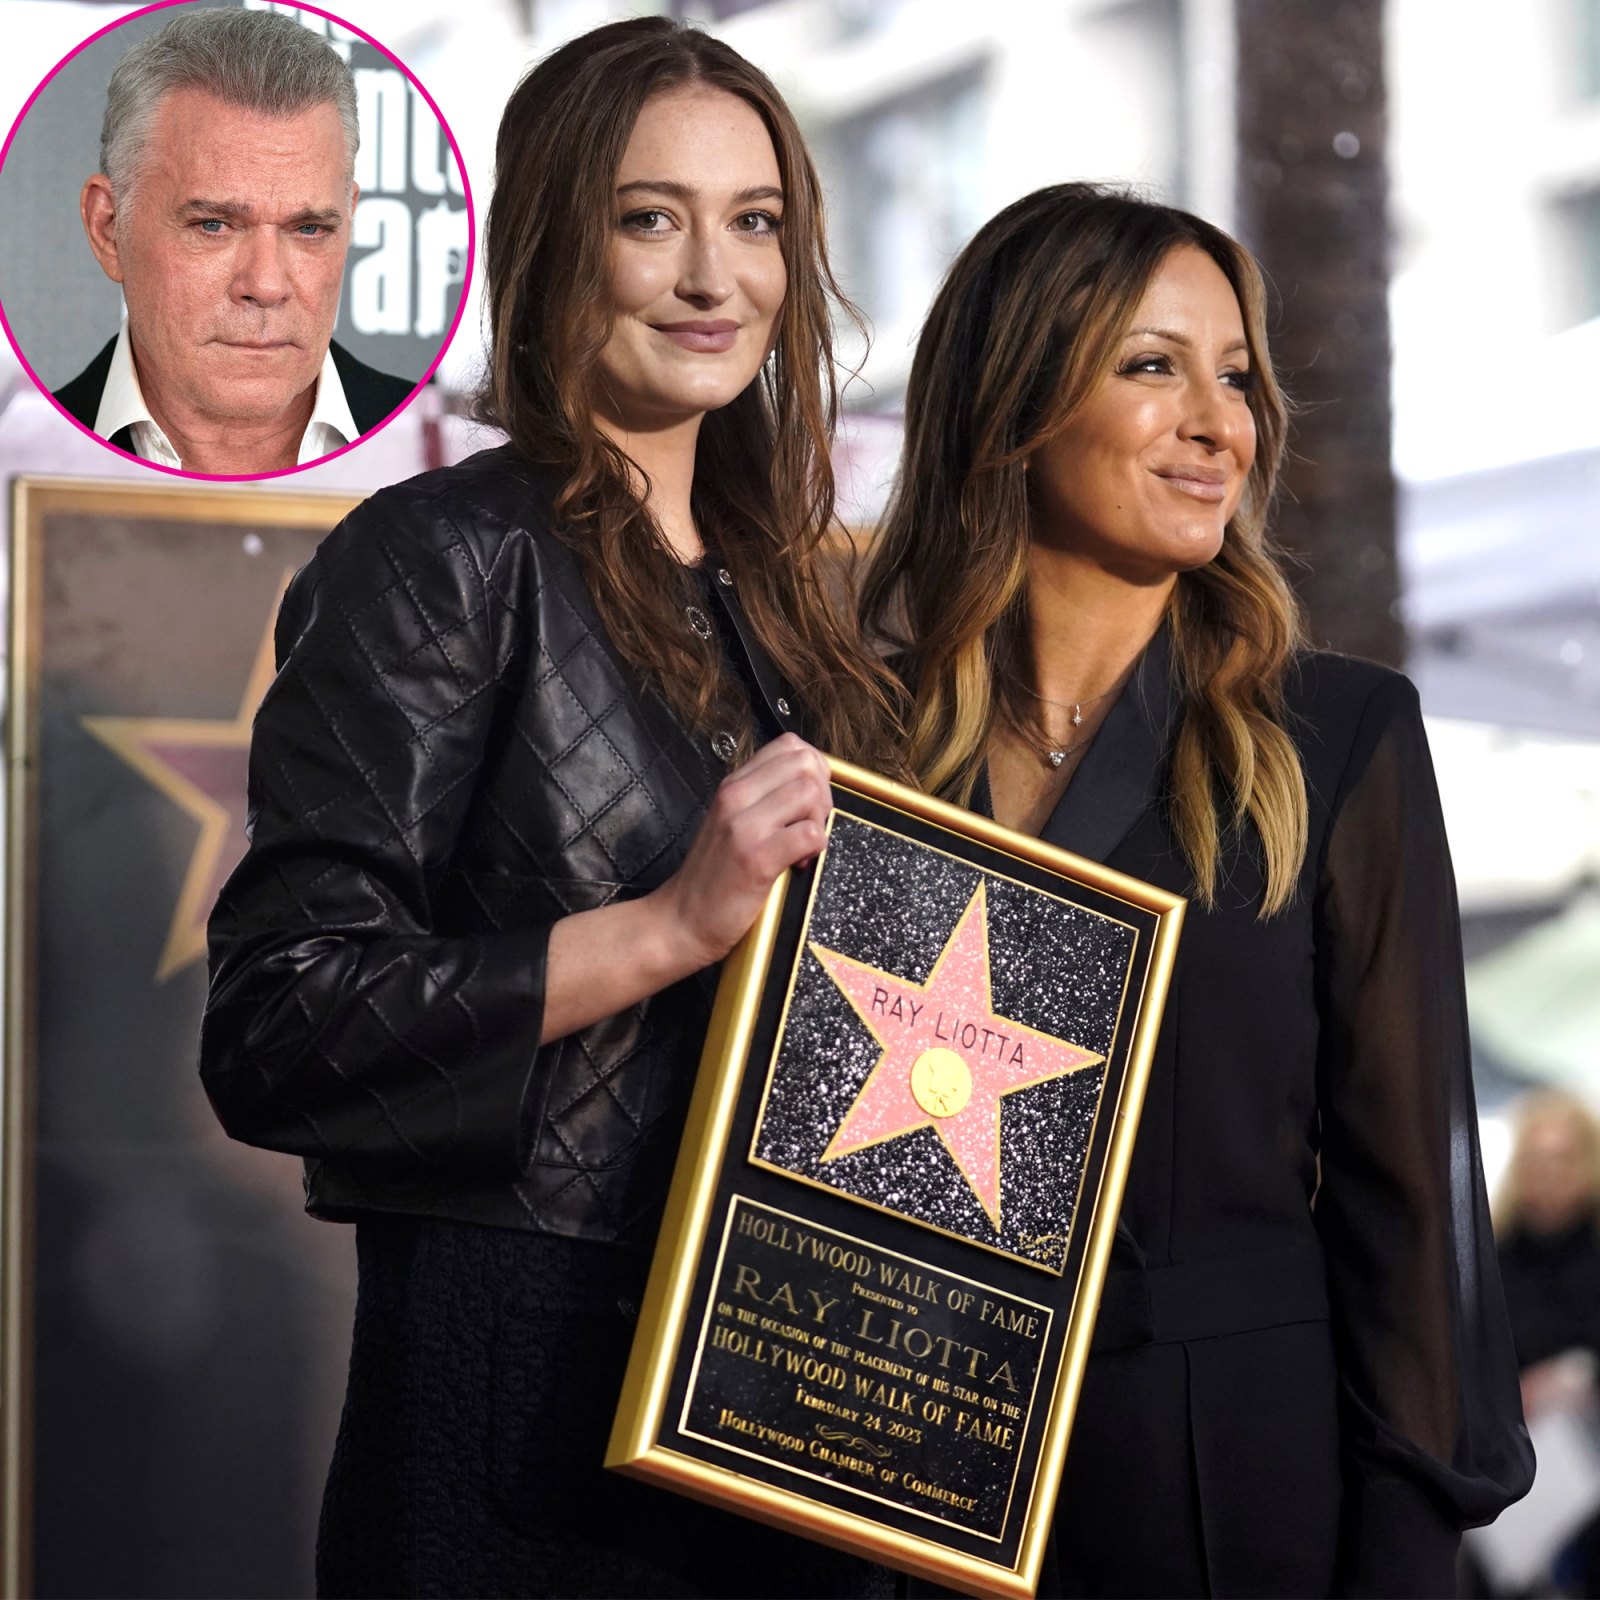 Ray Liotta’s Daughter Karsen Pays Tribute to Late Dad at Posthumous Hollywood Walk of Fame Ceremony: 'Everyone Deserves a Ray in Their Life'